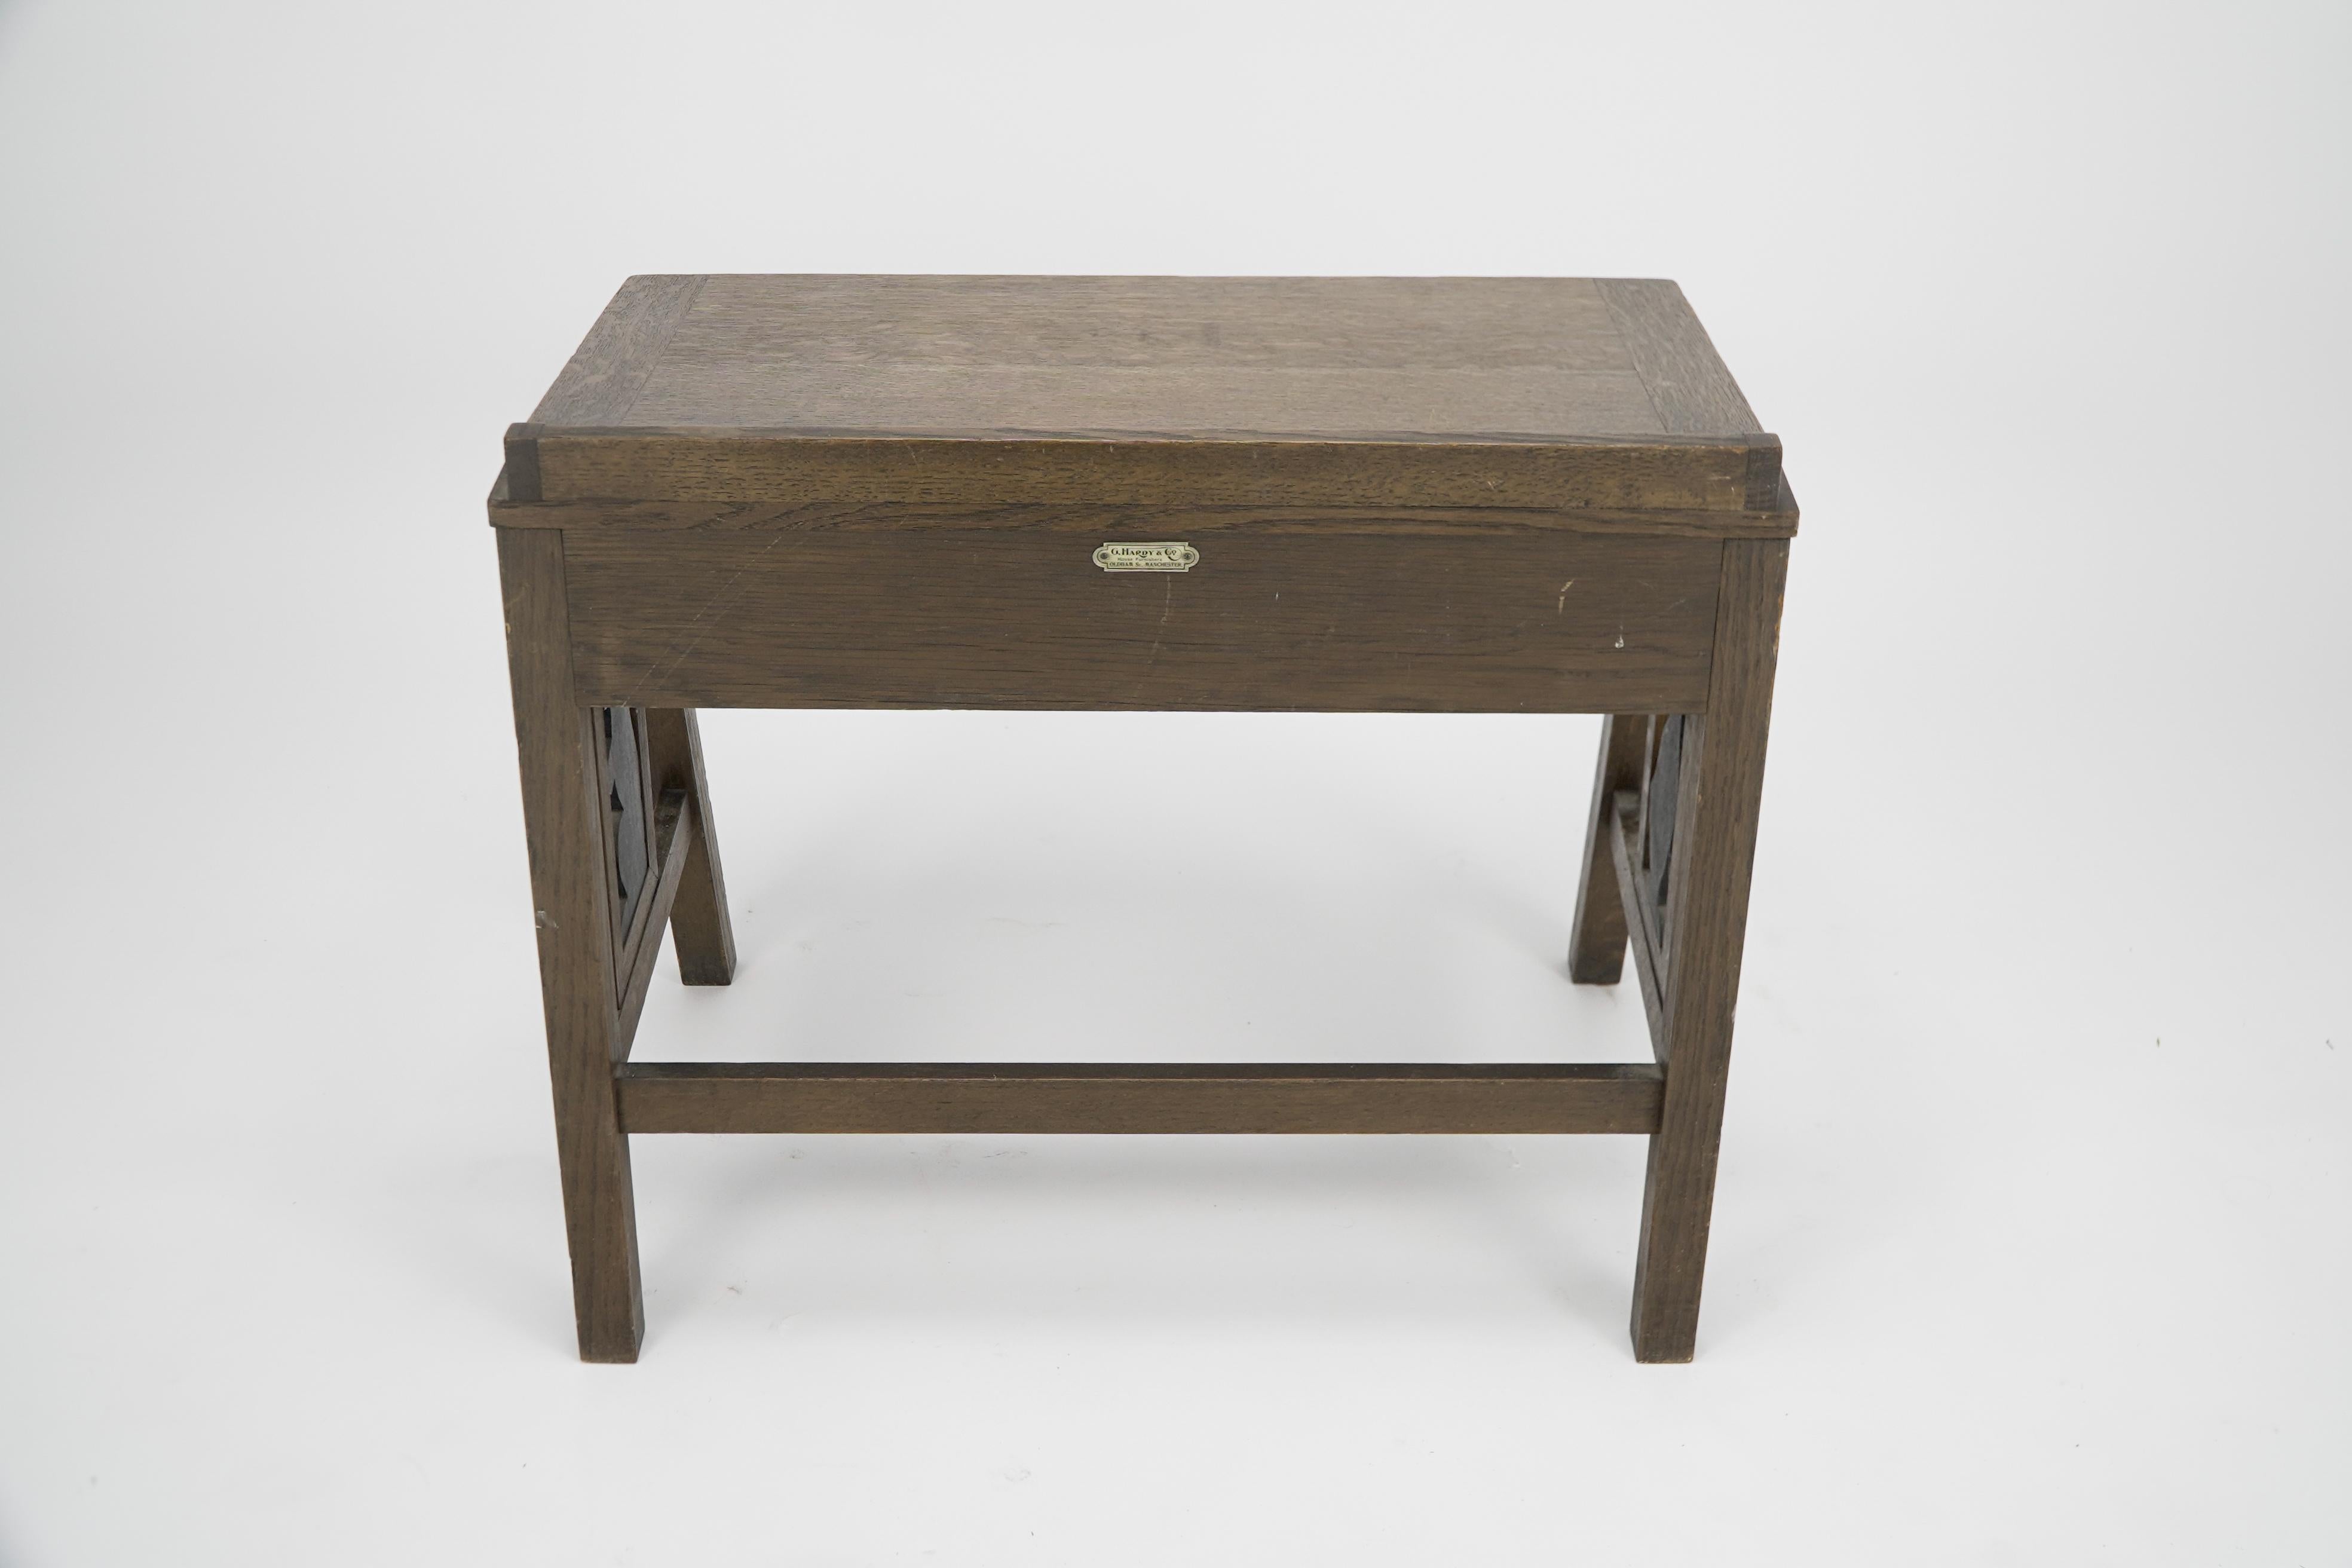 G F Hardy. An oak childs desk with a slanted writing area and storage underneath For Sale 1